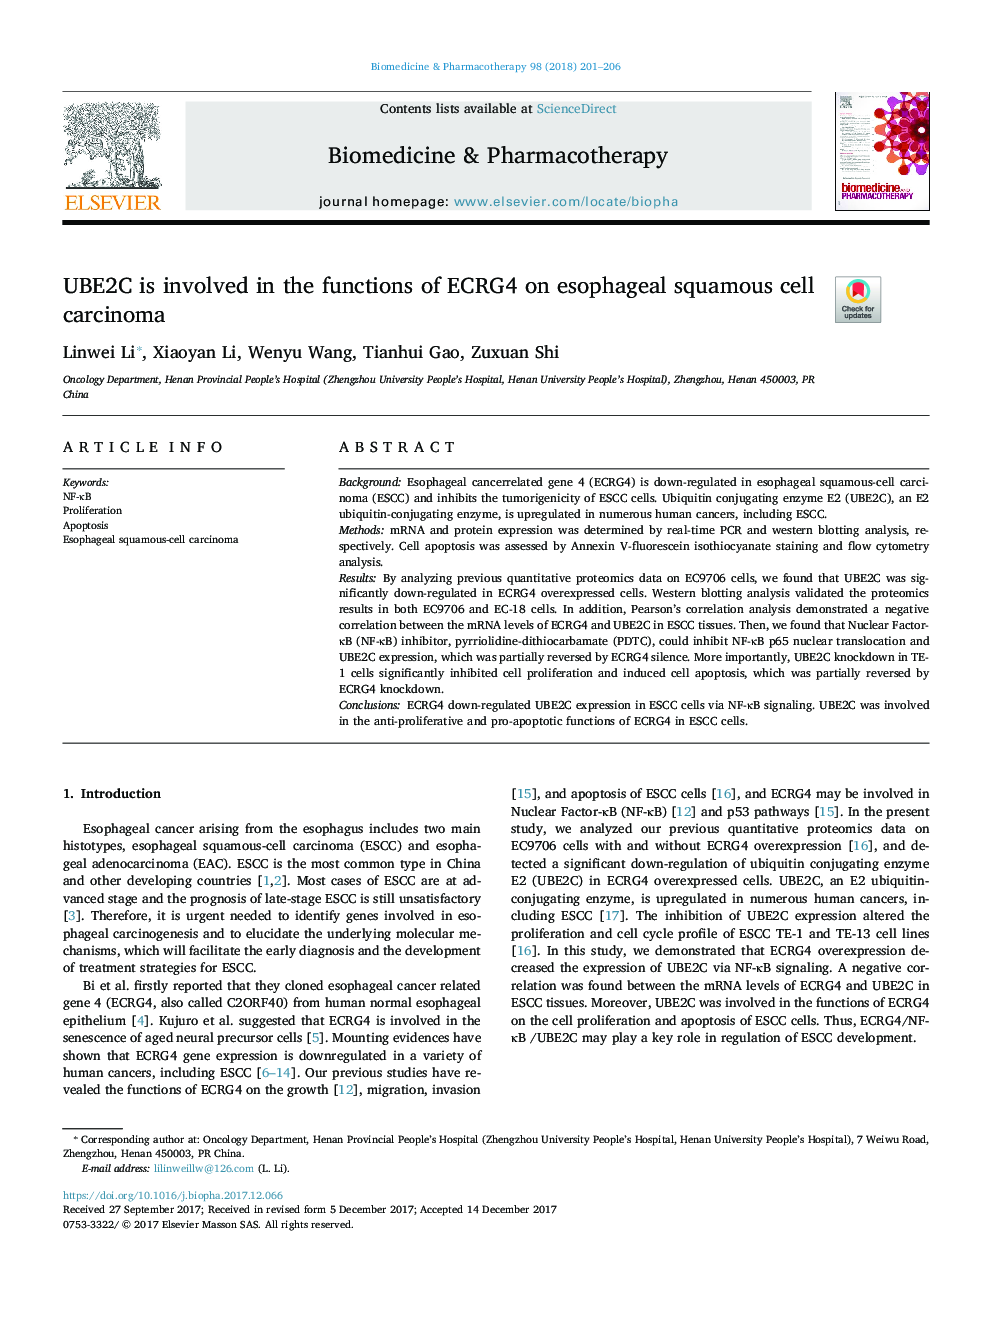 UBE2C is involved in the functions of ECRG4 on esophageal squamous cell carcinoma